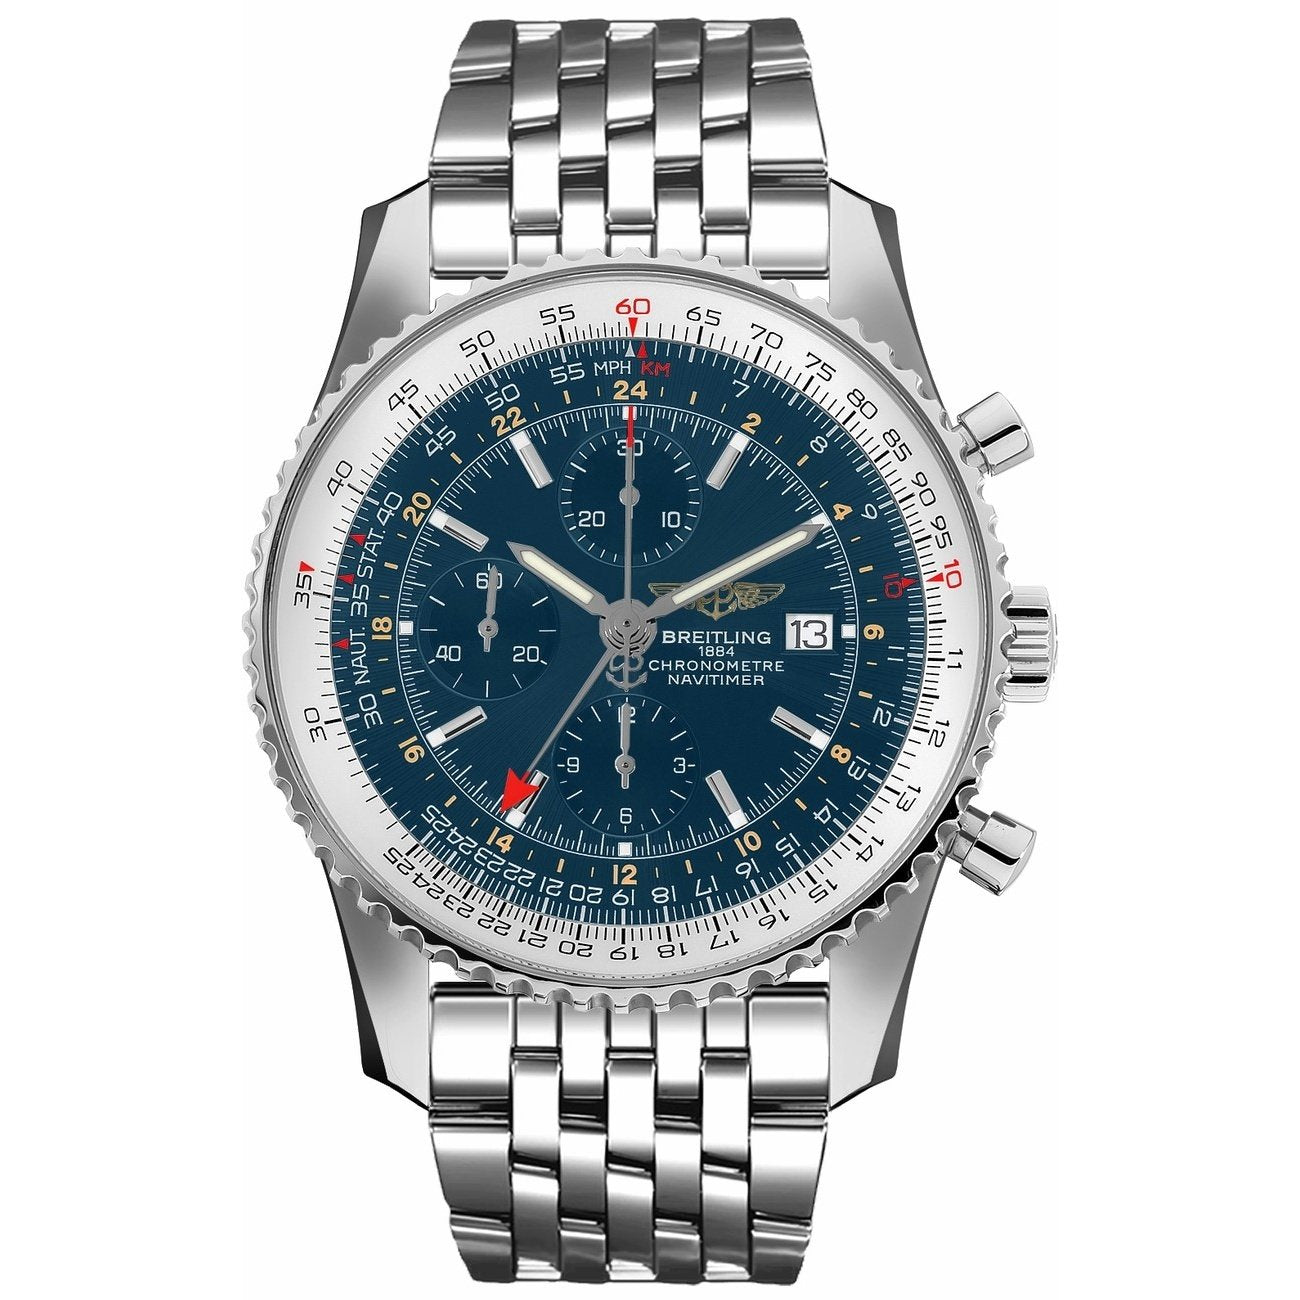 Breitling Navitimer World Automatic Chronograph Blue Dial Men's Watch A2432212-C651-453A